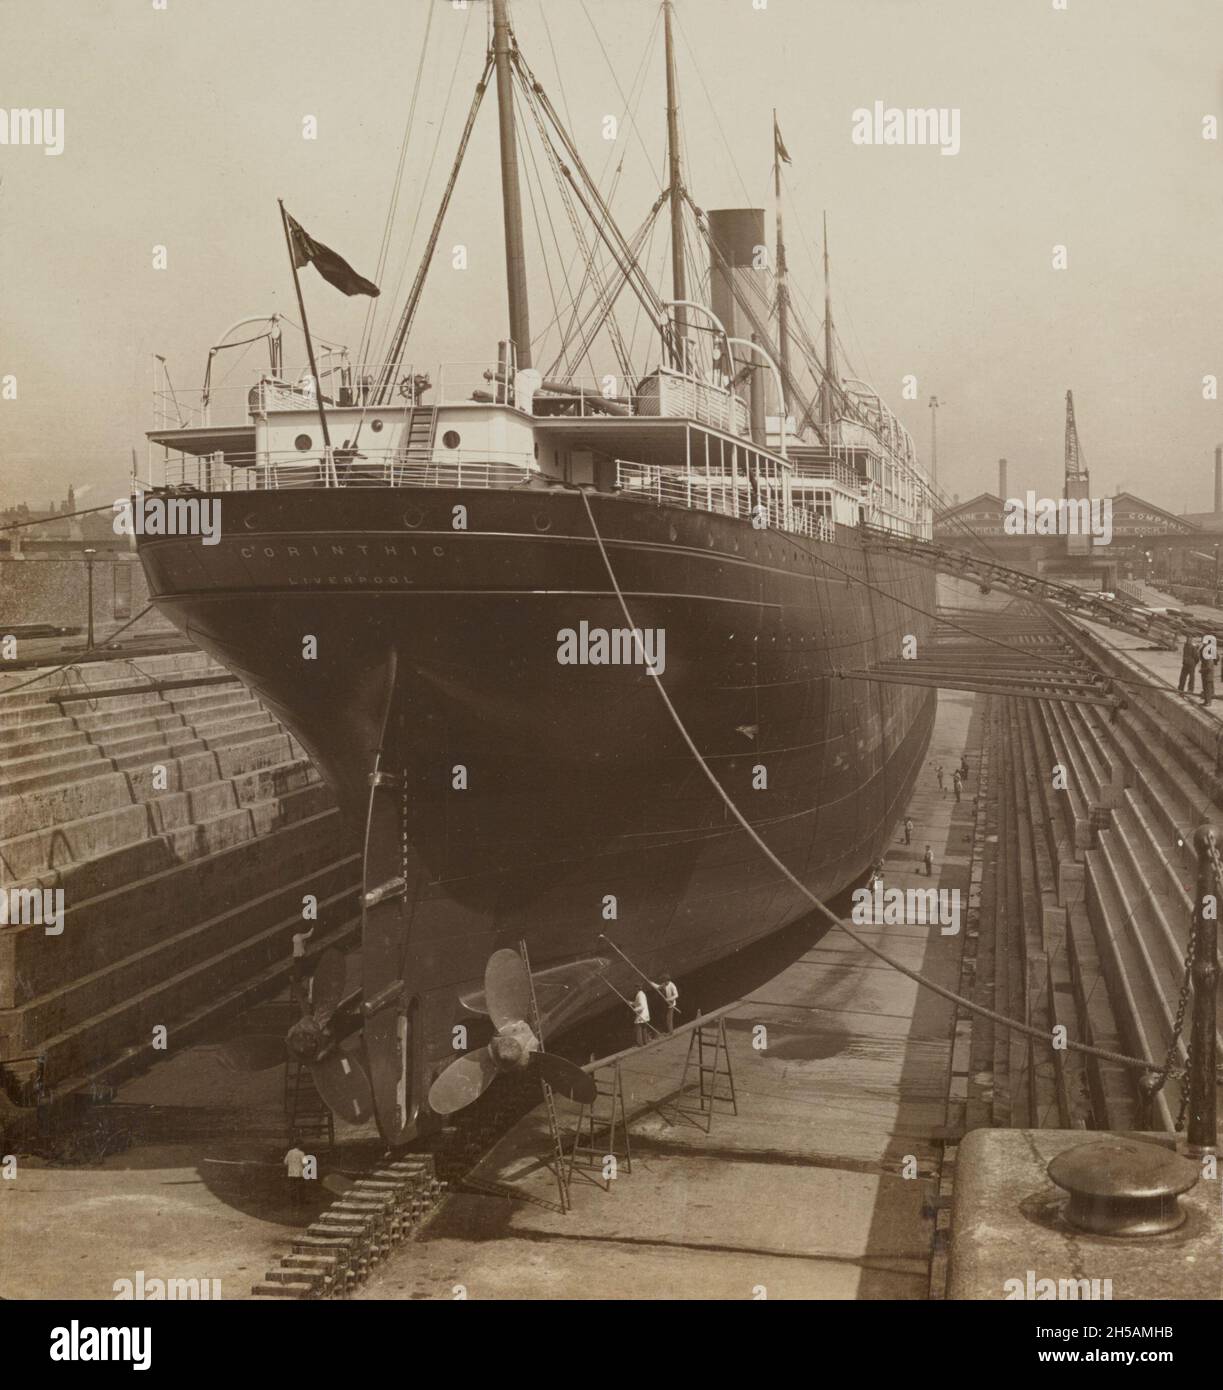 Vintage stereoscopic photo dated 1903 of the passenger liner SS Corinthic in dry dock for maintenance at the city of Liverpool in England.  Built by Harland and Wolff in Belfast she was launched in 1902 for the British shipping companies White Star Line and Shaw, Savill & Albion Line. She operated as a combined cargo and passenger liner from Liverpool to New Zealand. The SS Corinthic was scrapped in 1931 Stock Photo